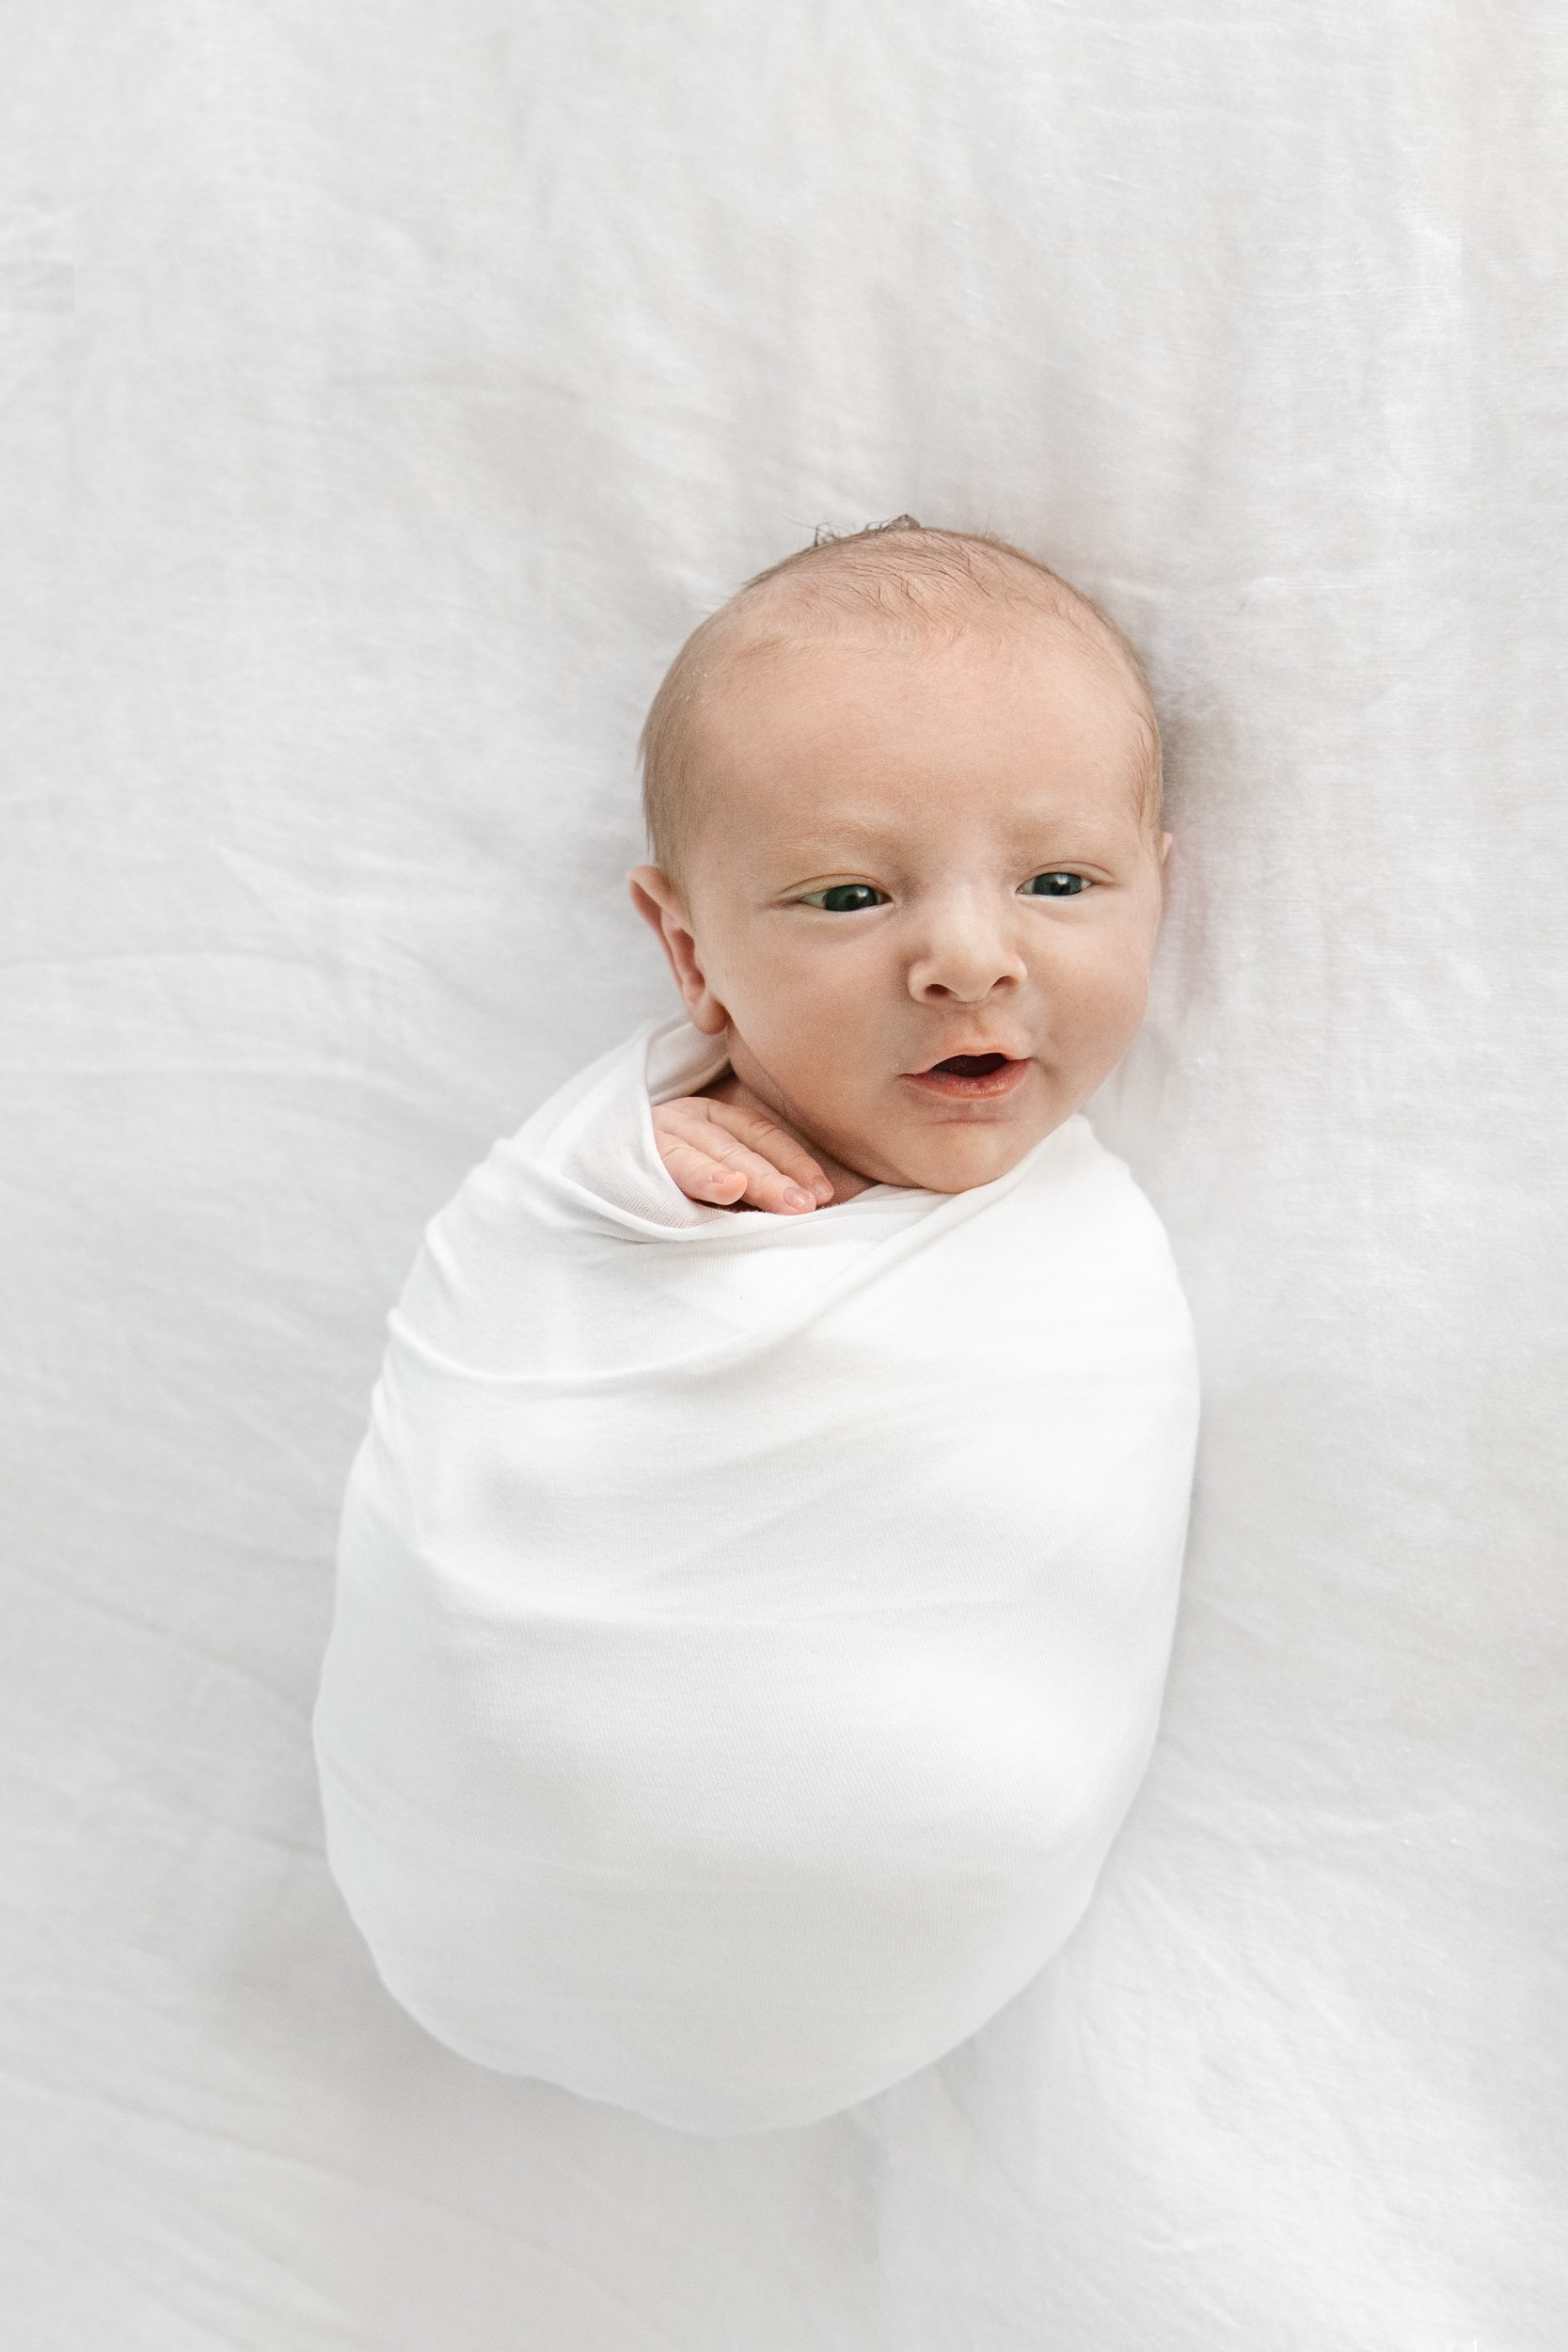   Newborn baby wrapped up in white swaddle blanket, smiling at the camera in at-home portrait taken by Nicole Hawkins, a newborn photographer in northern New Jersey. #EssexCountyFamilyPhotographer #PassaicCountyFamilyPhotographer #NorthernNewJerseyFa